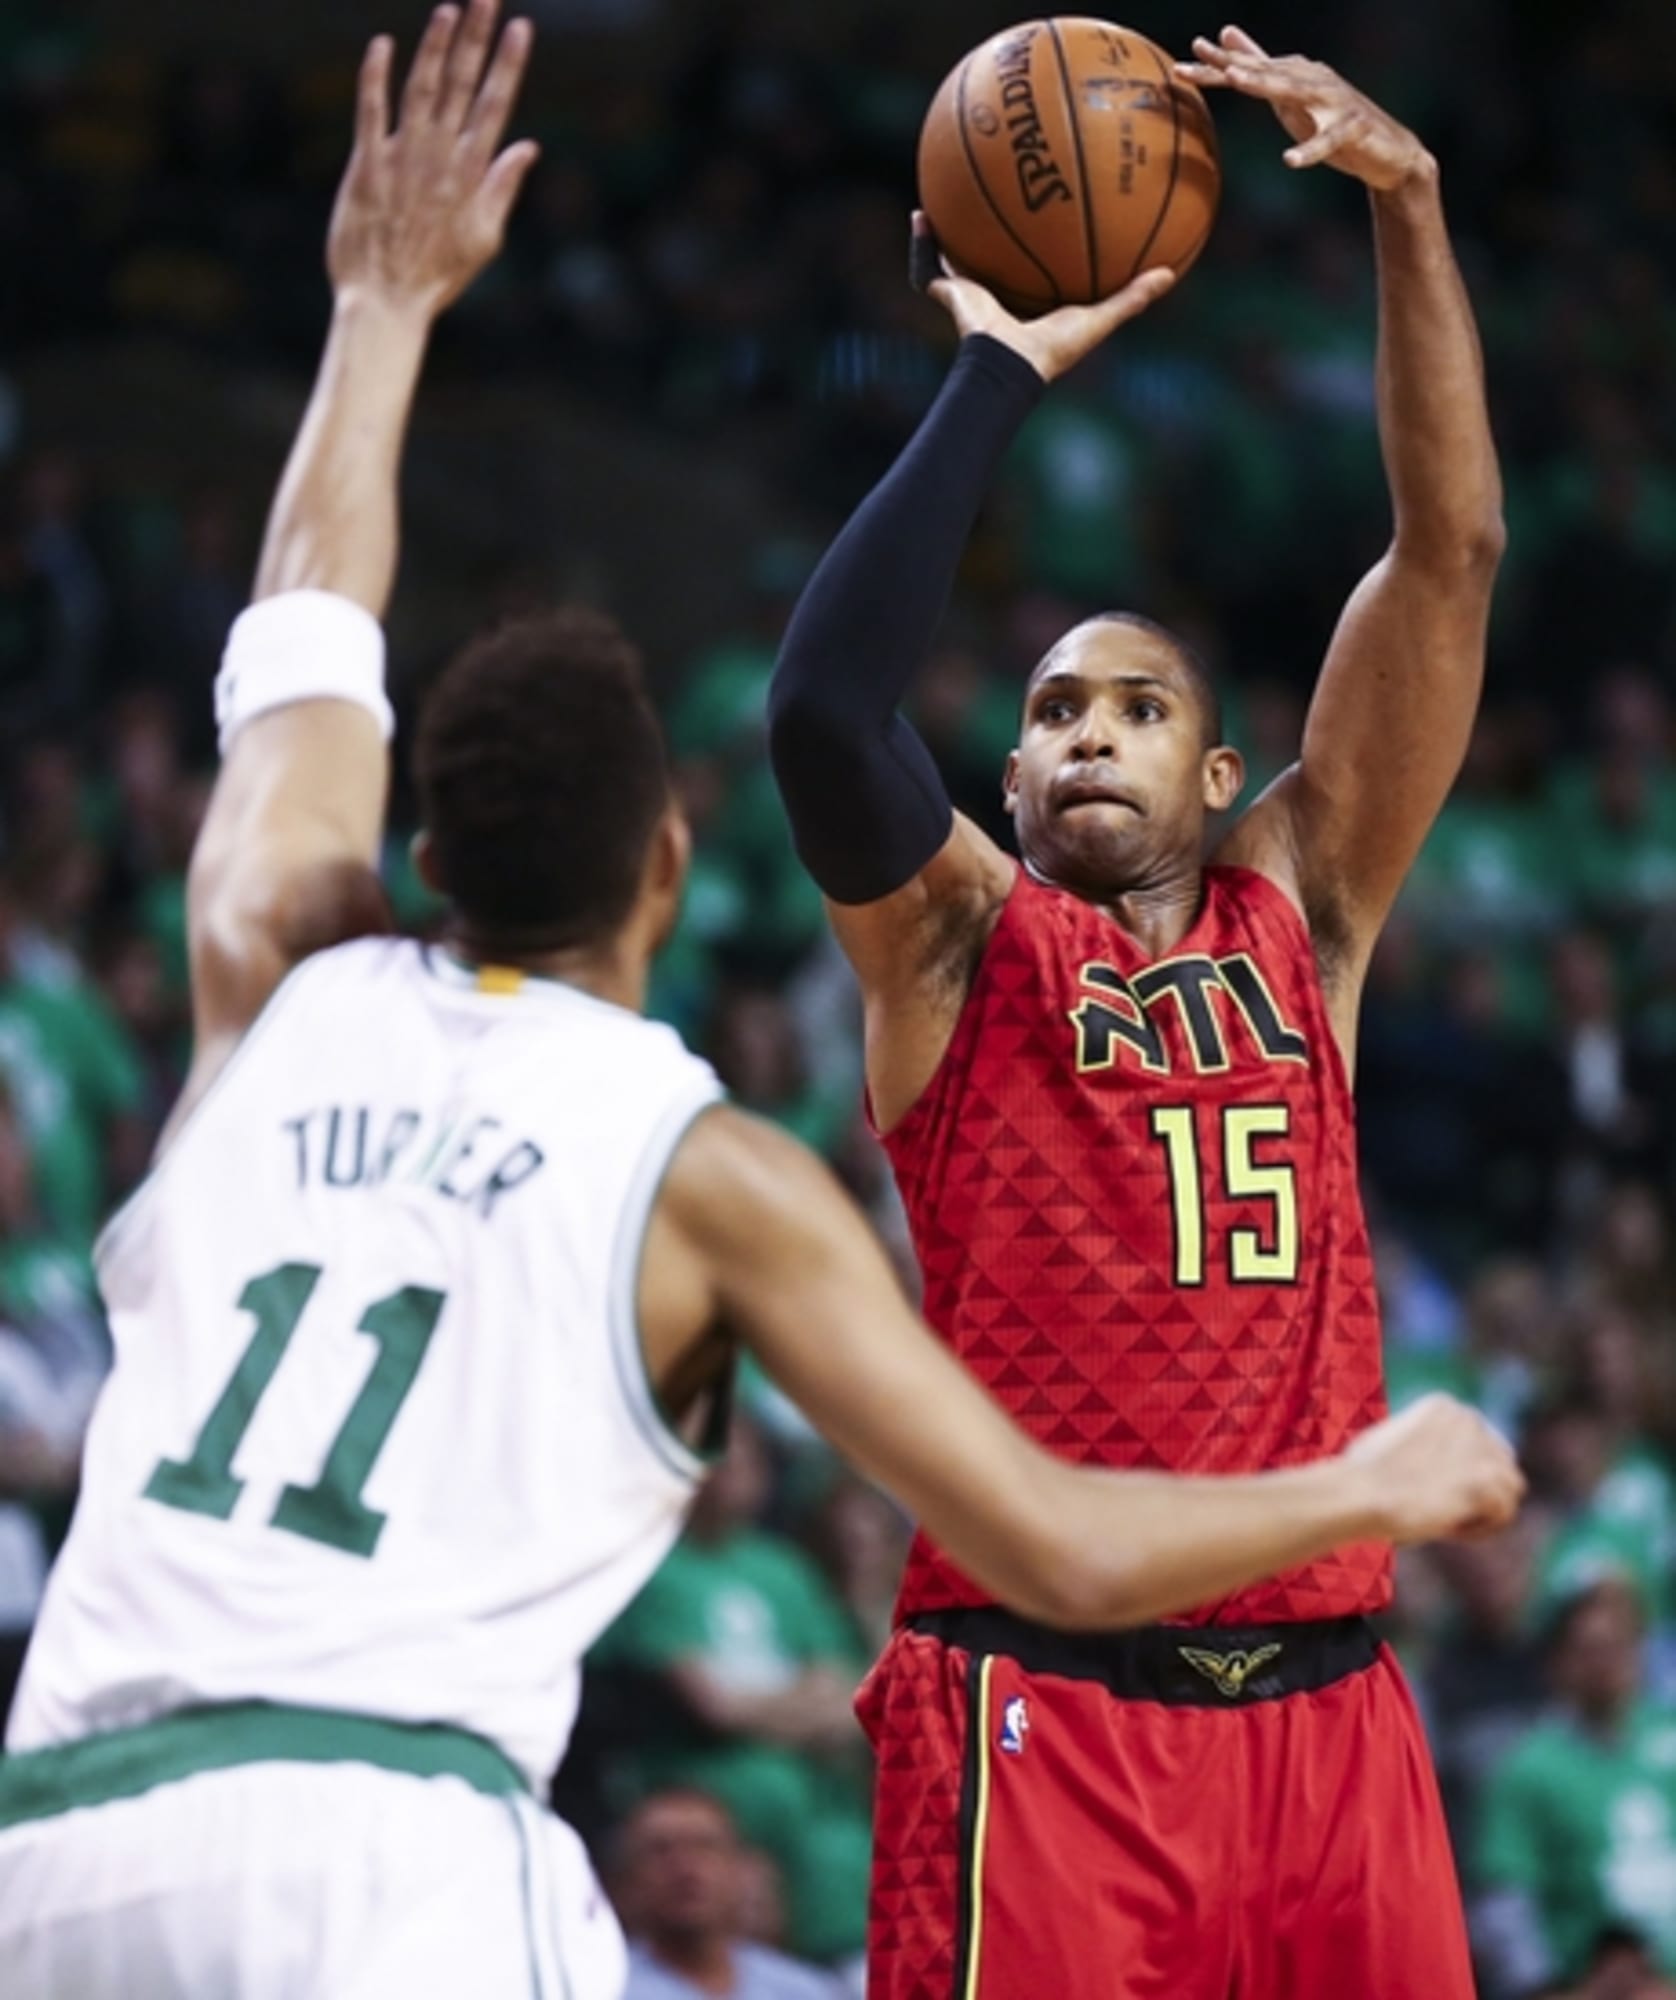 Why the Hawks were right now to offer Al Horford a Max Deal